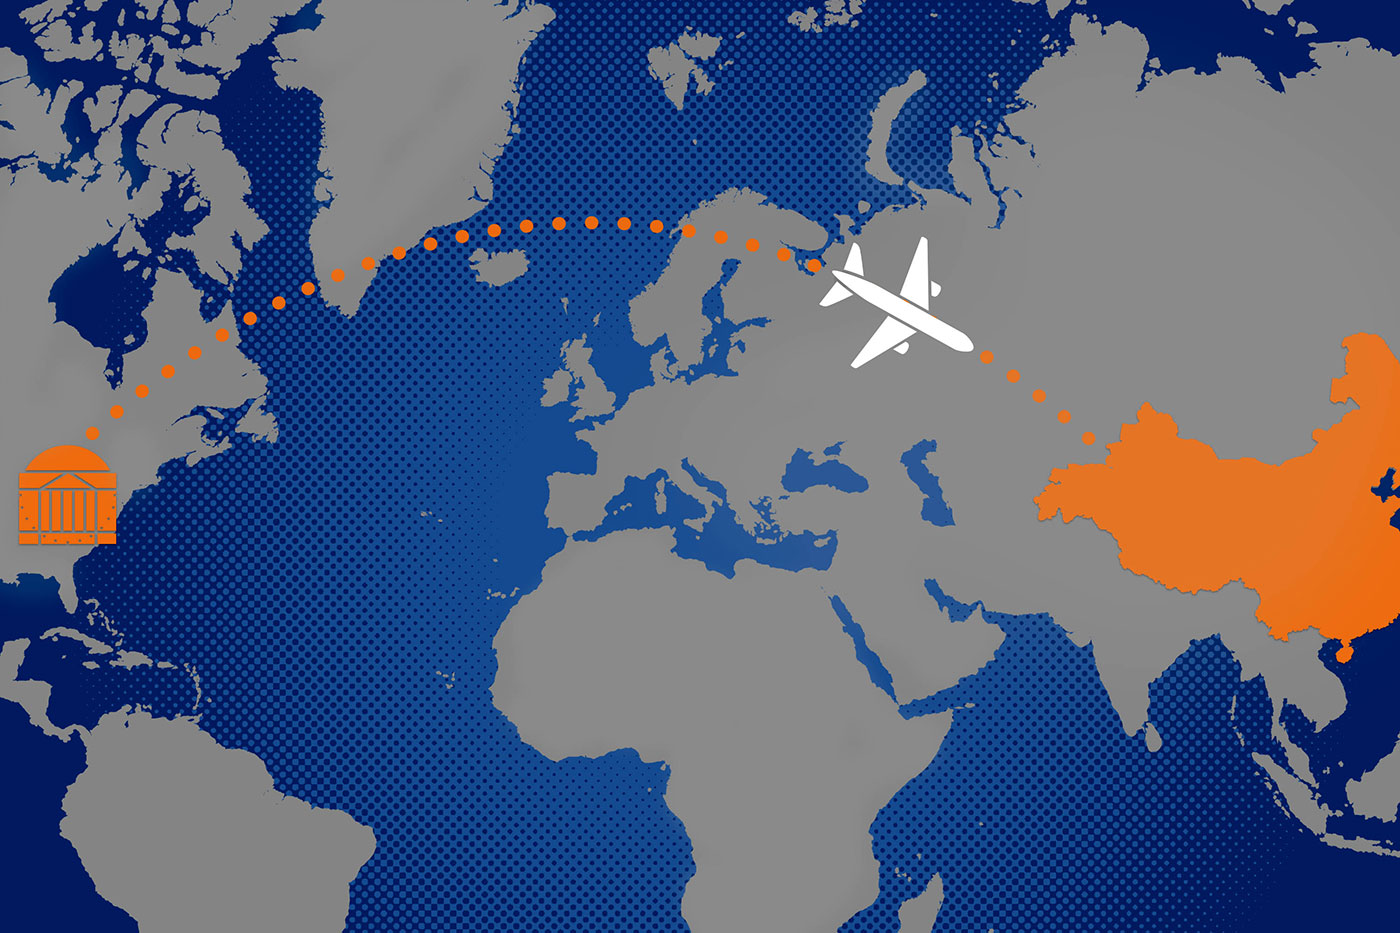 Illustration of world map. The uva rotunda icon is over the US and a dotted line points to a plane flying to China